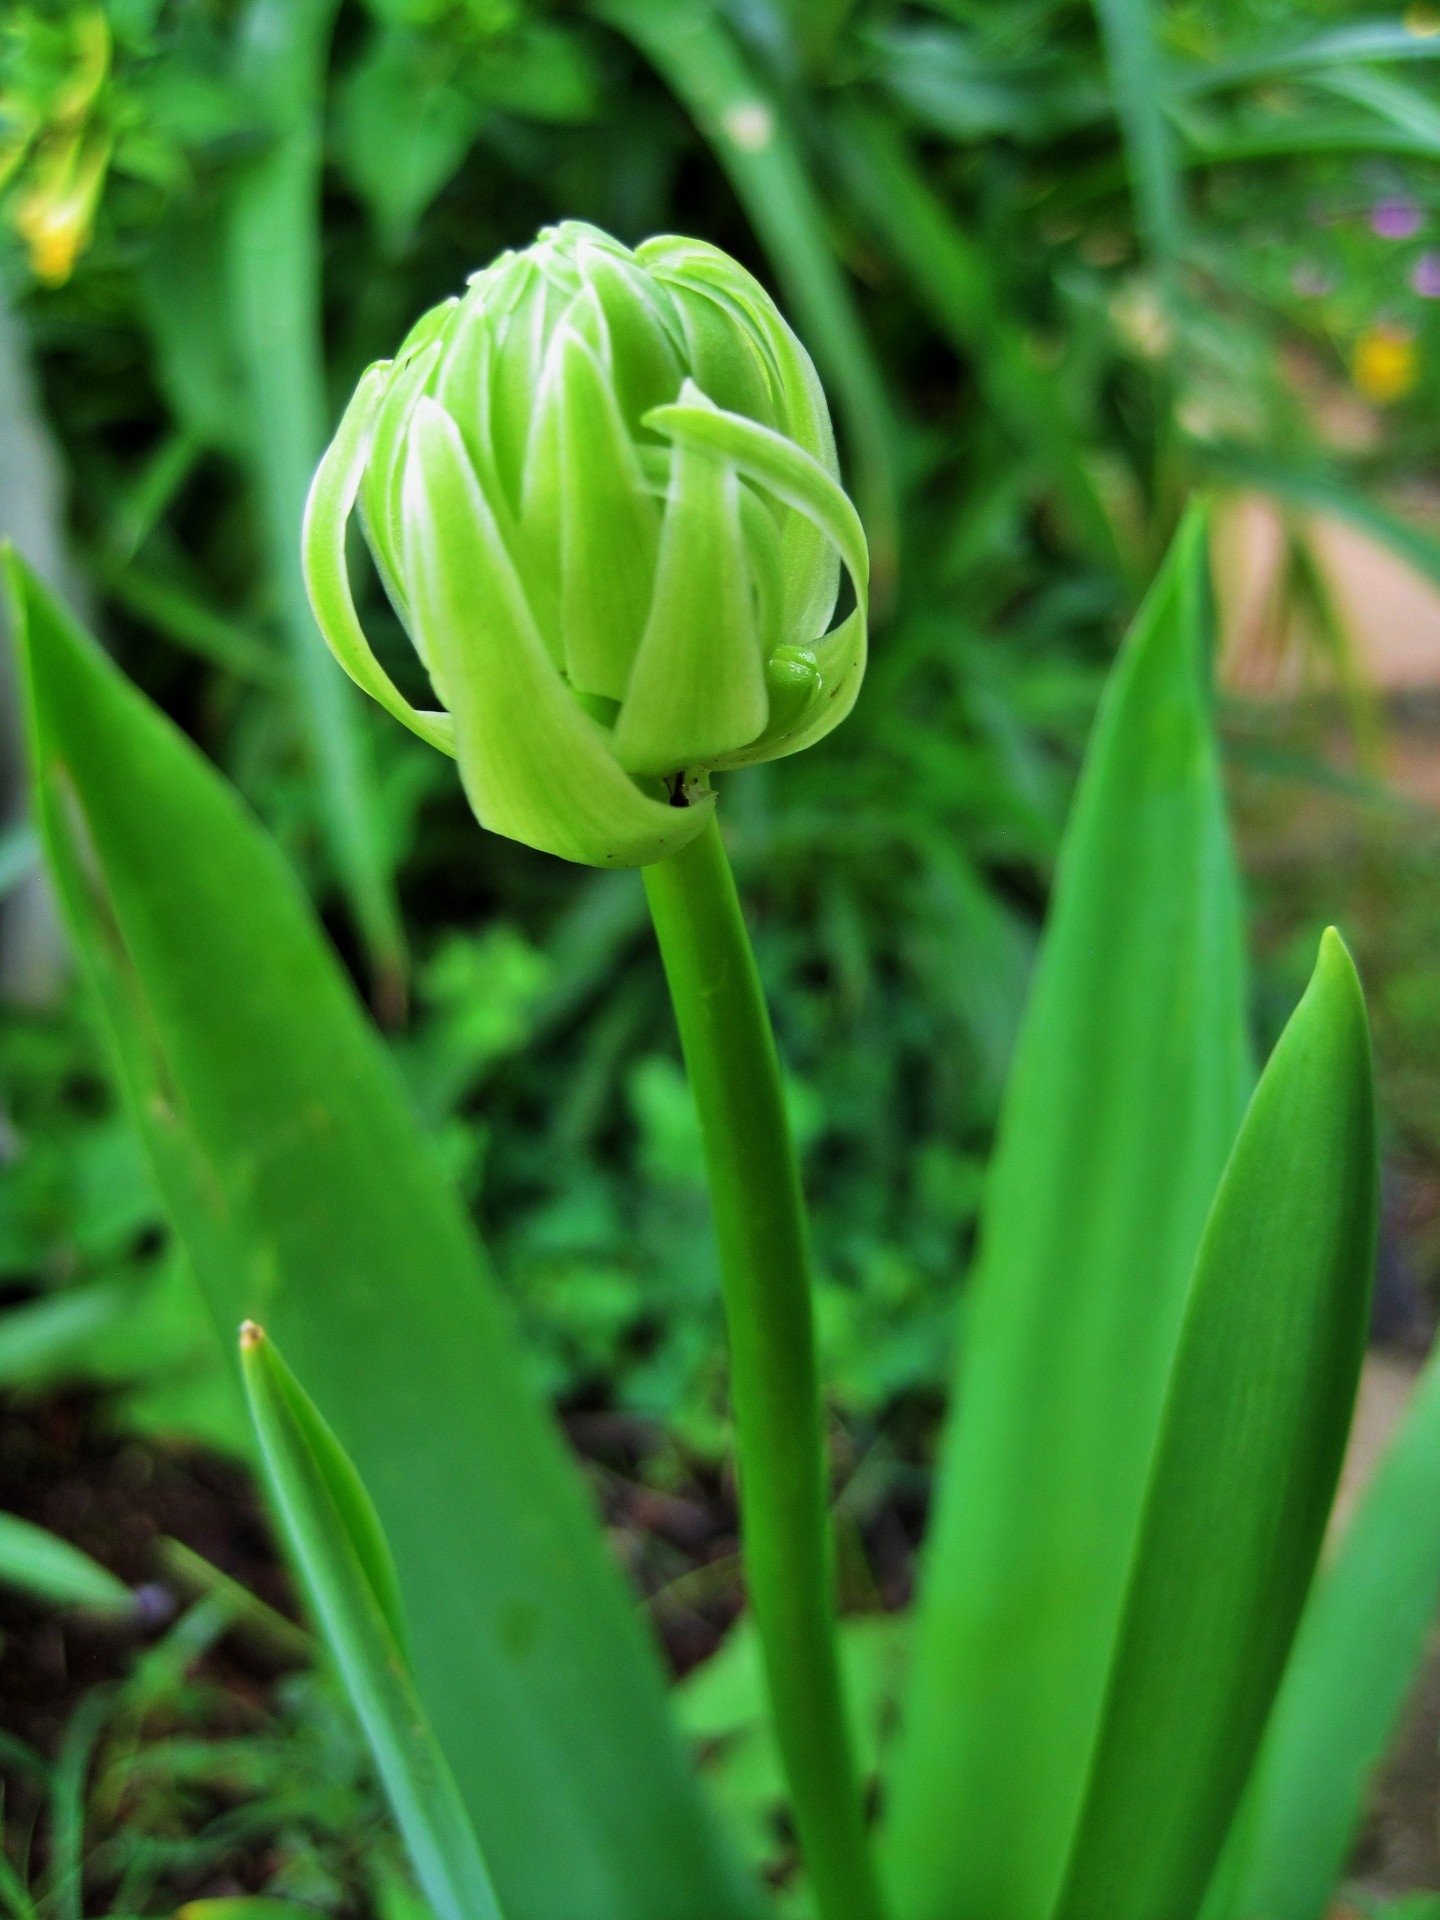 Ornithogalum About To Blossom